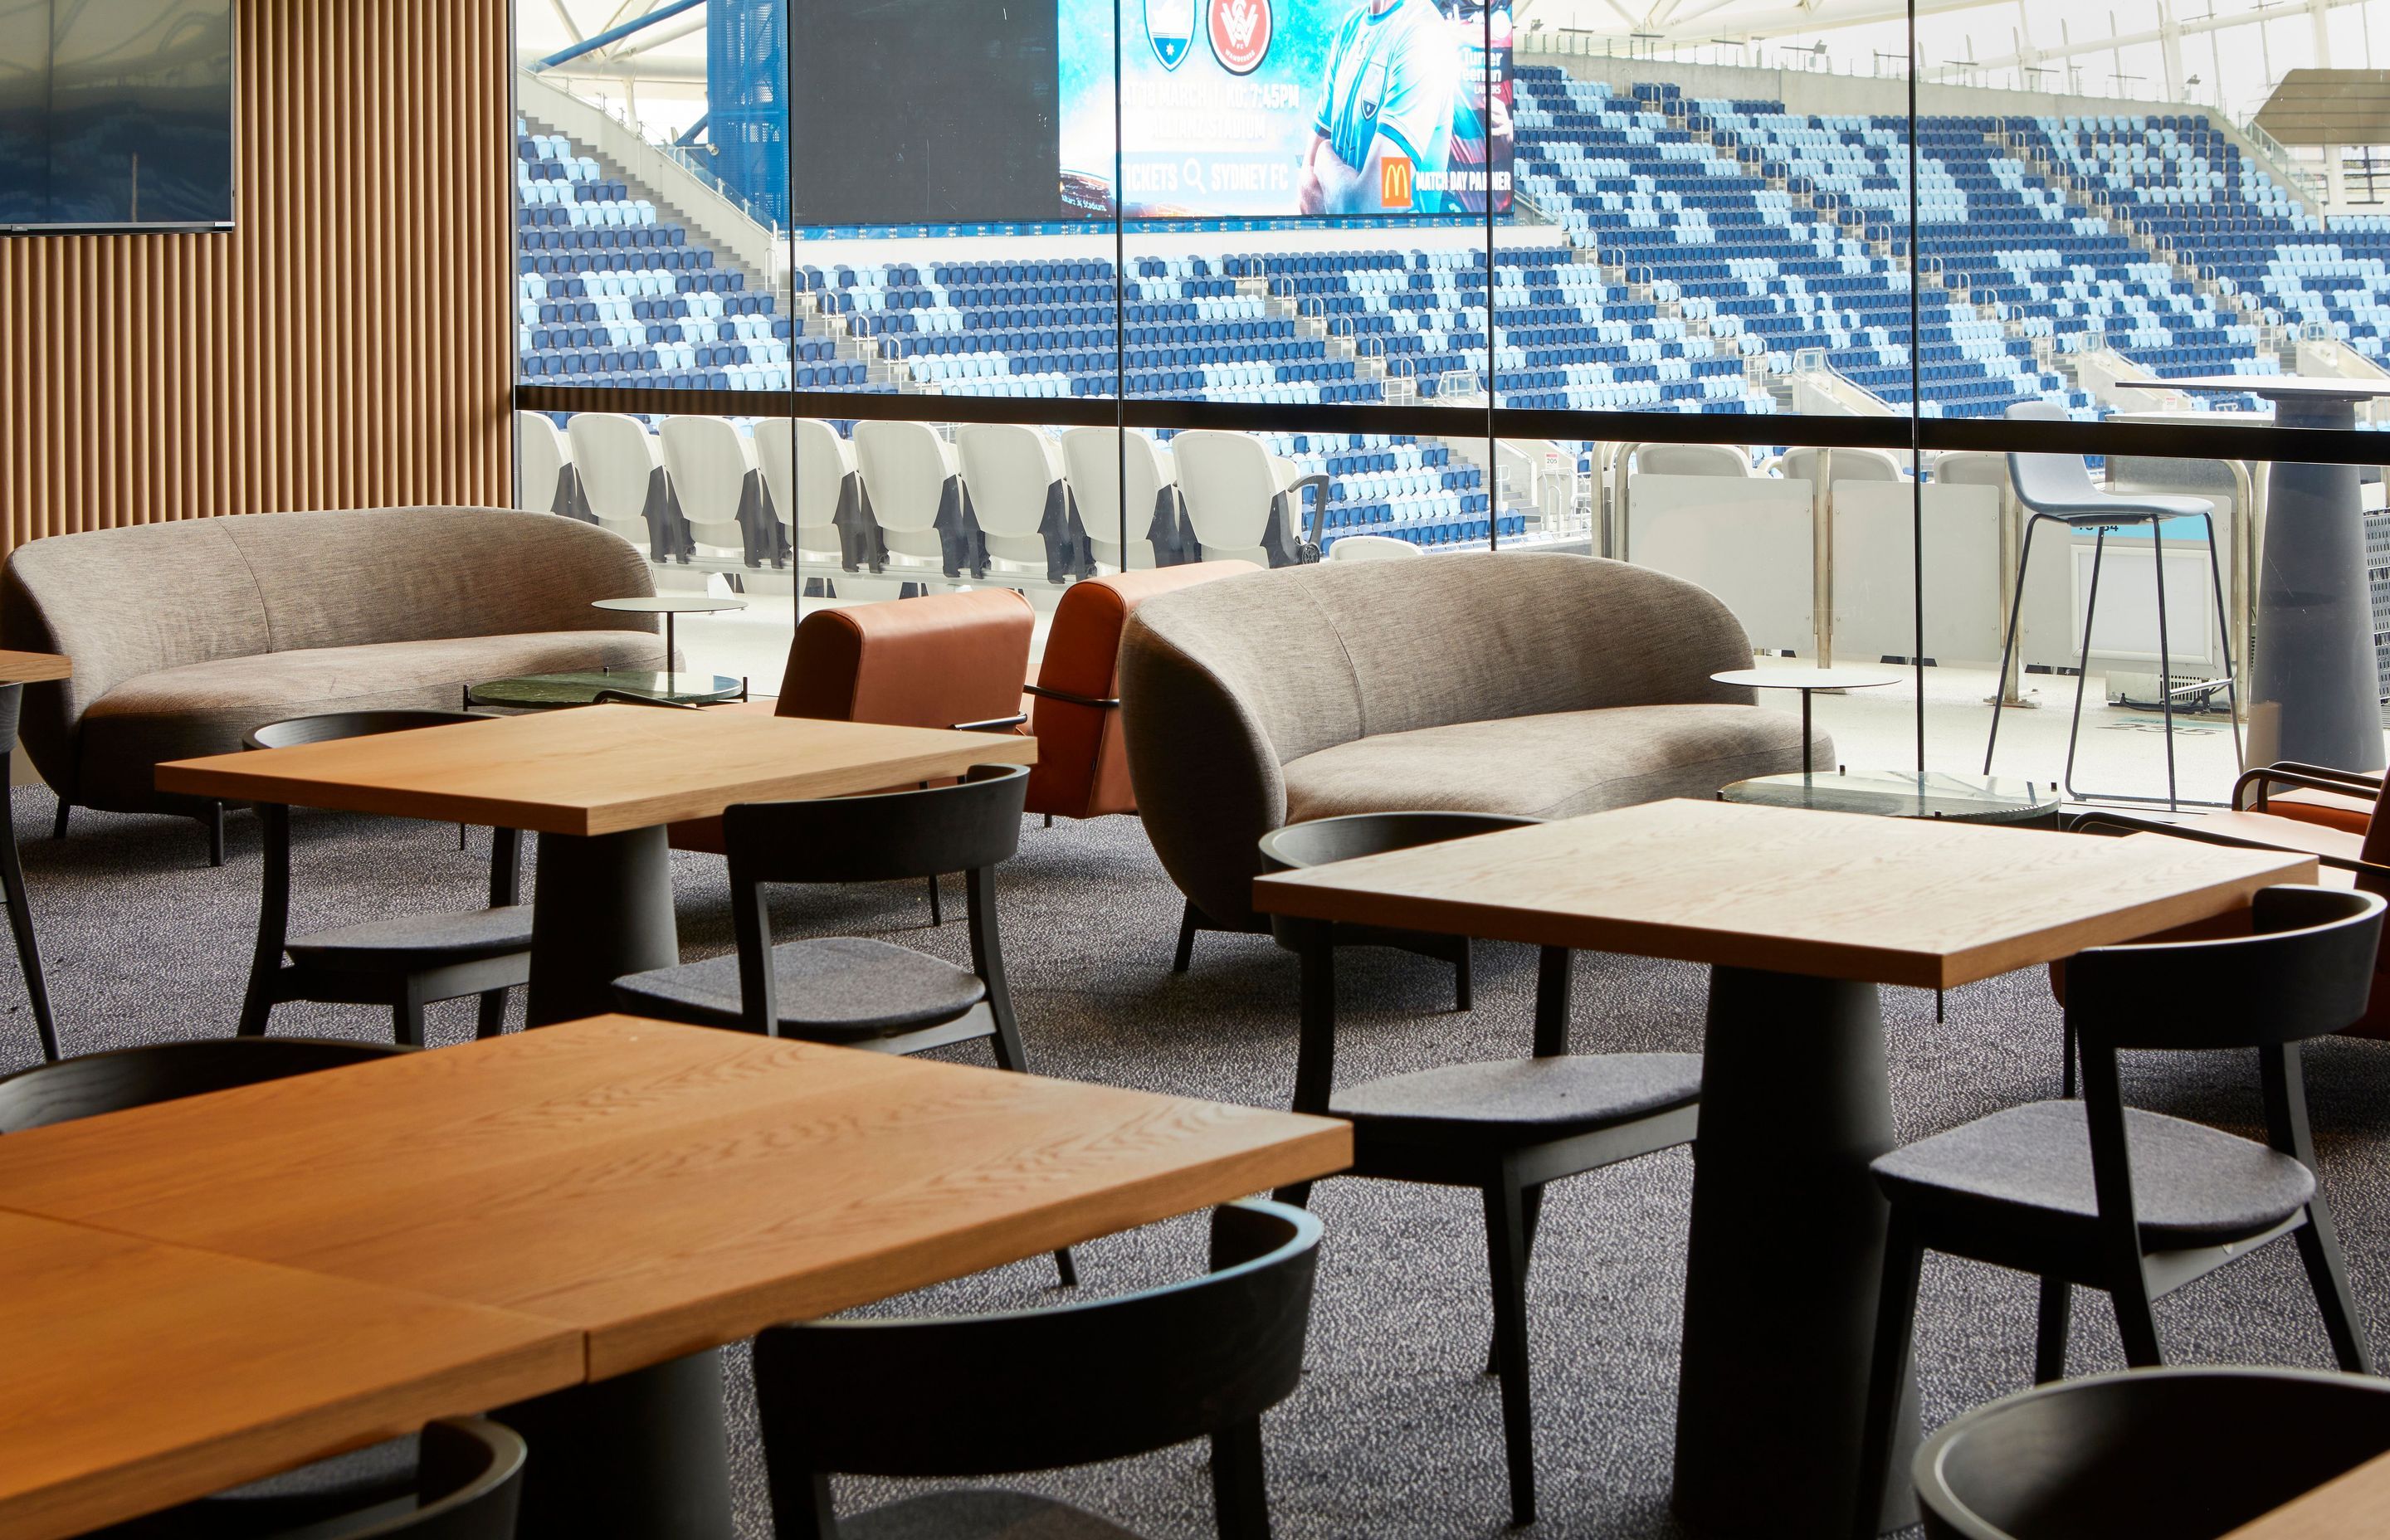 The Hirer’s Dining Room on the eastern wing has incredible views of the playing field – the fit-out designed to cater to numerous events.